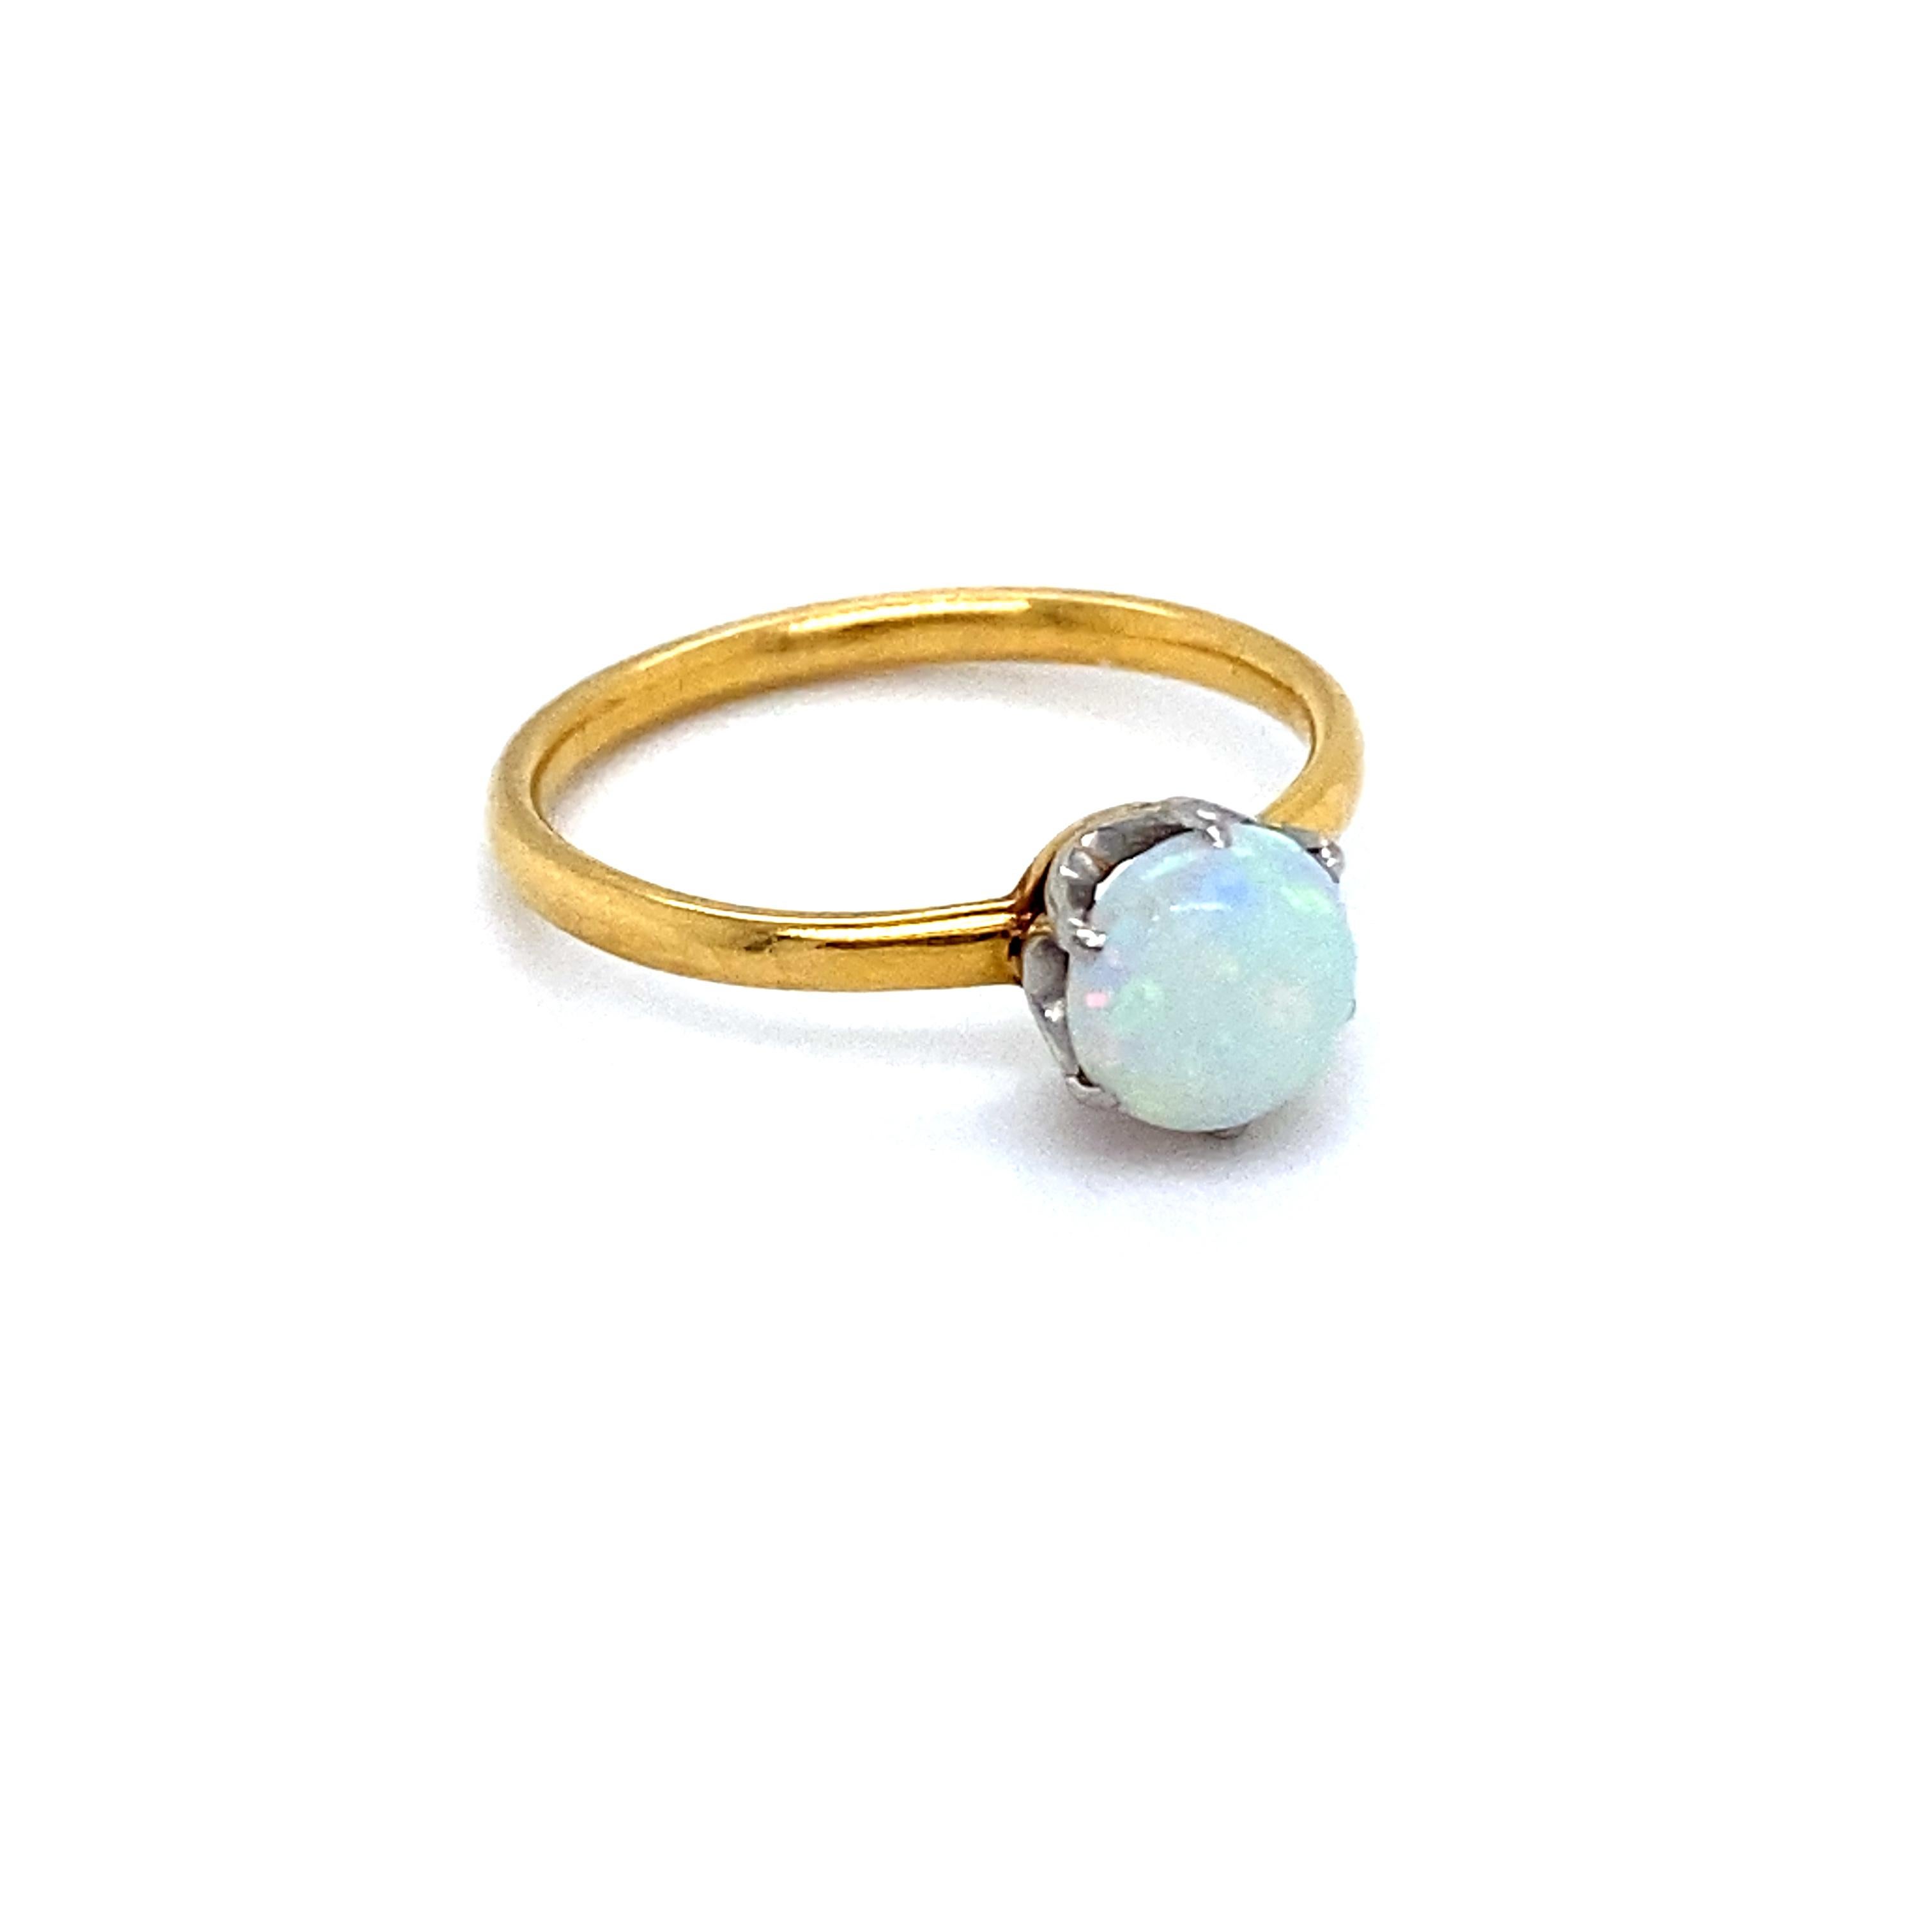 This Vintage Tiffany & Co 18K Yellow Gold Opal Solitaire Ring Engagement Ring is a beautiful, classic solitaire design that Tiffany is known for! Crafted in 18K Yellow Gold, the design features their sweet buttercup setting with a wonderful Oval